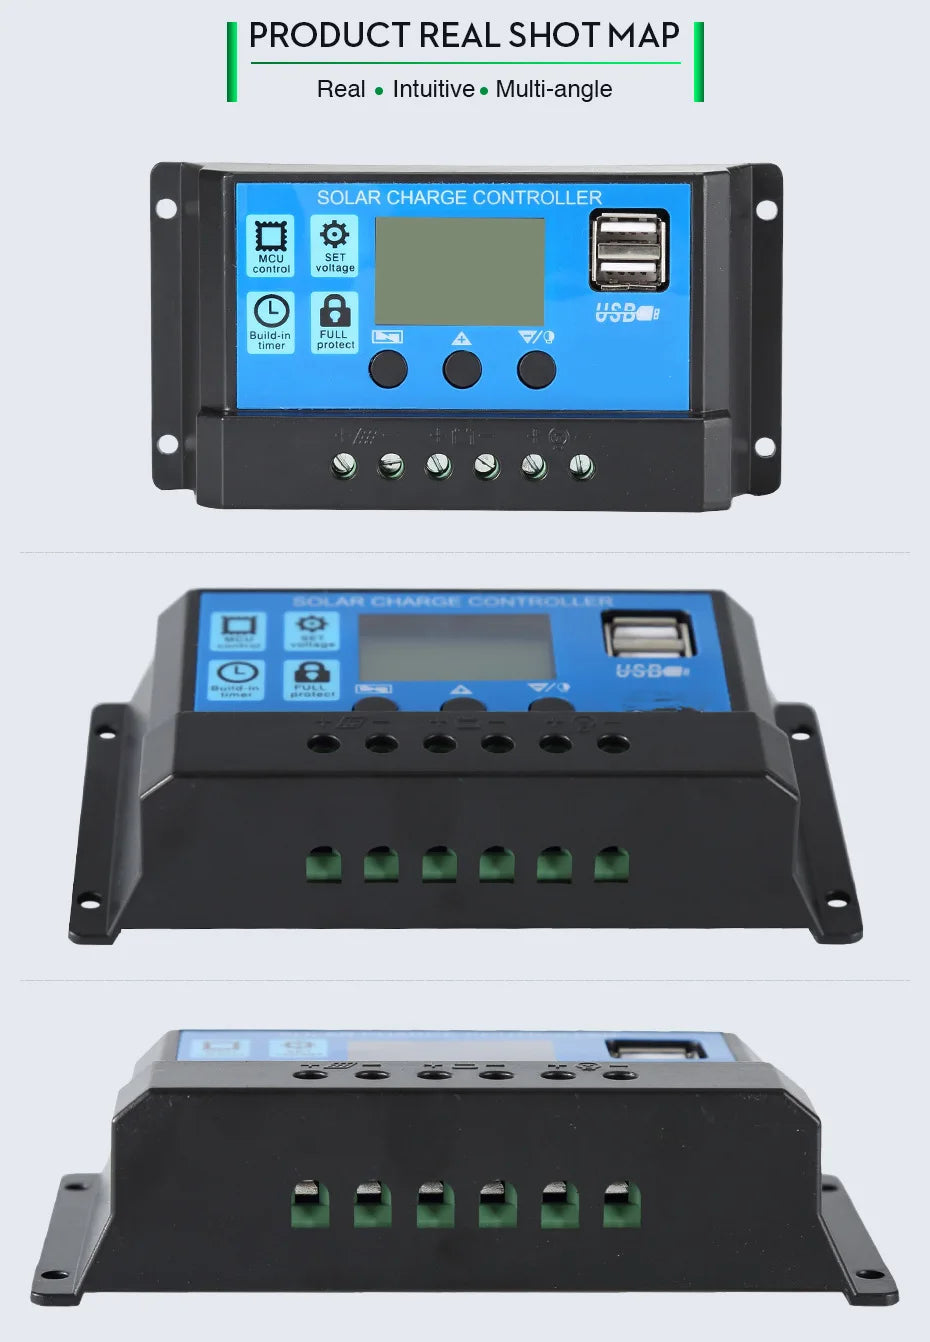 10A-100A MPPT Solar Controller, Real-time monitoring device with multiple angles, compact design, and safety features.